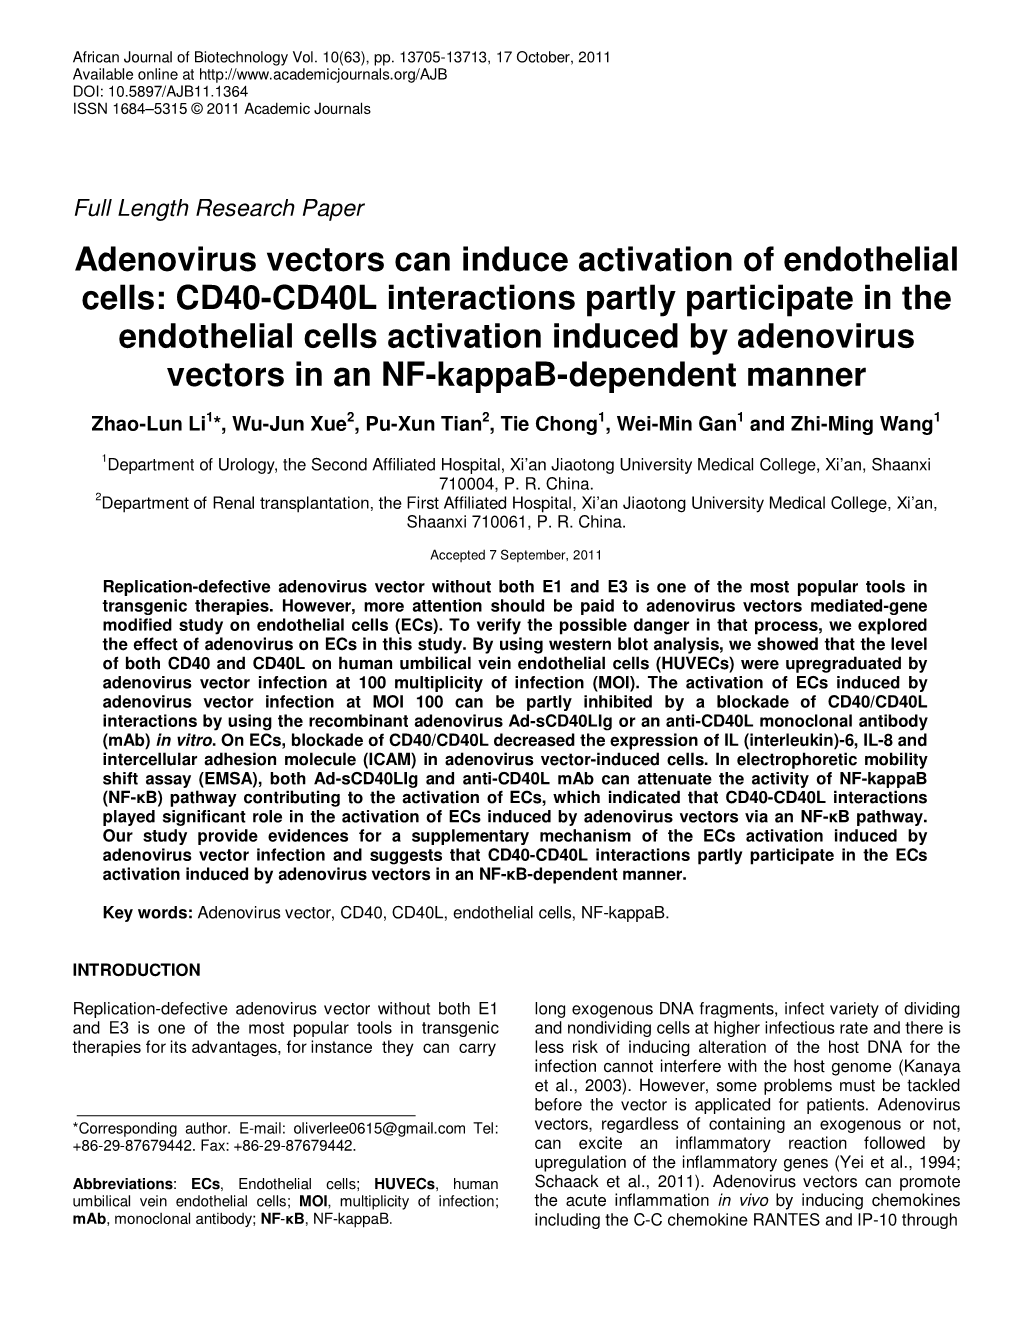 CD40-CD40L Interactions Partly Participate in the Endothelial Cells Activation Induced by Adenovirus Vectors in an NF-Kappab-Dependent Manner